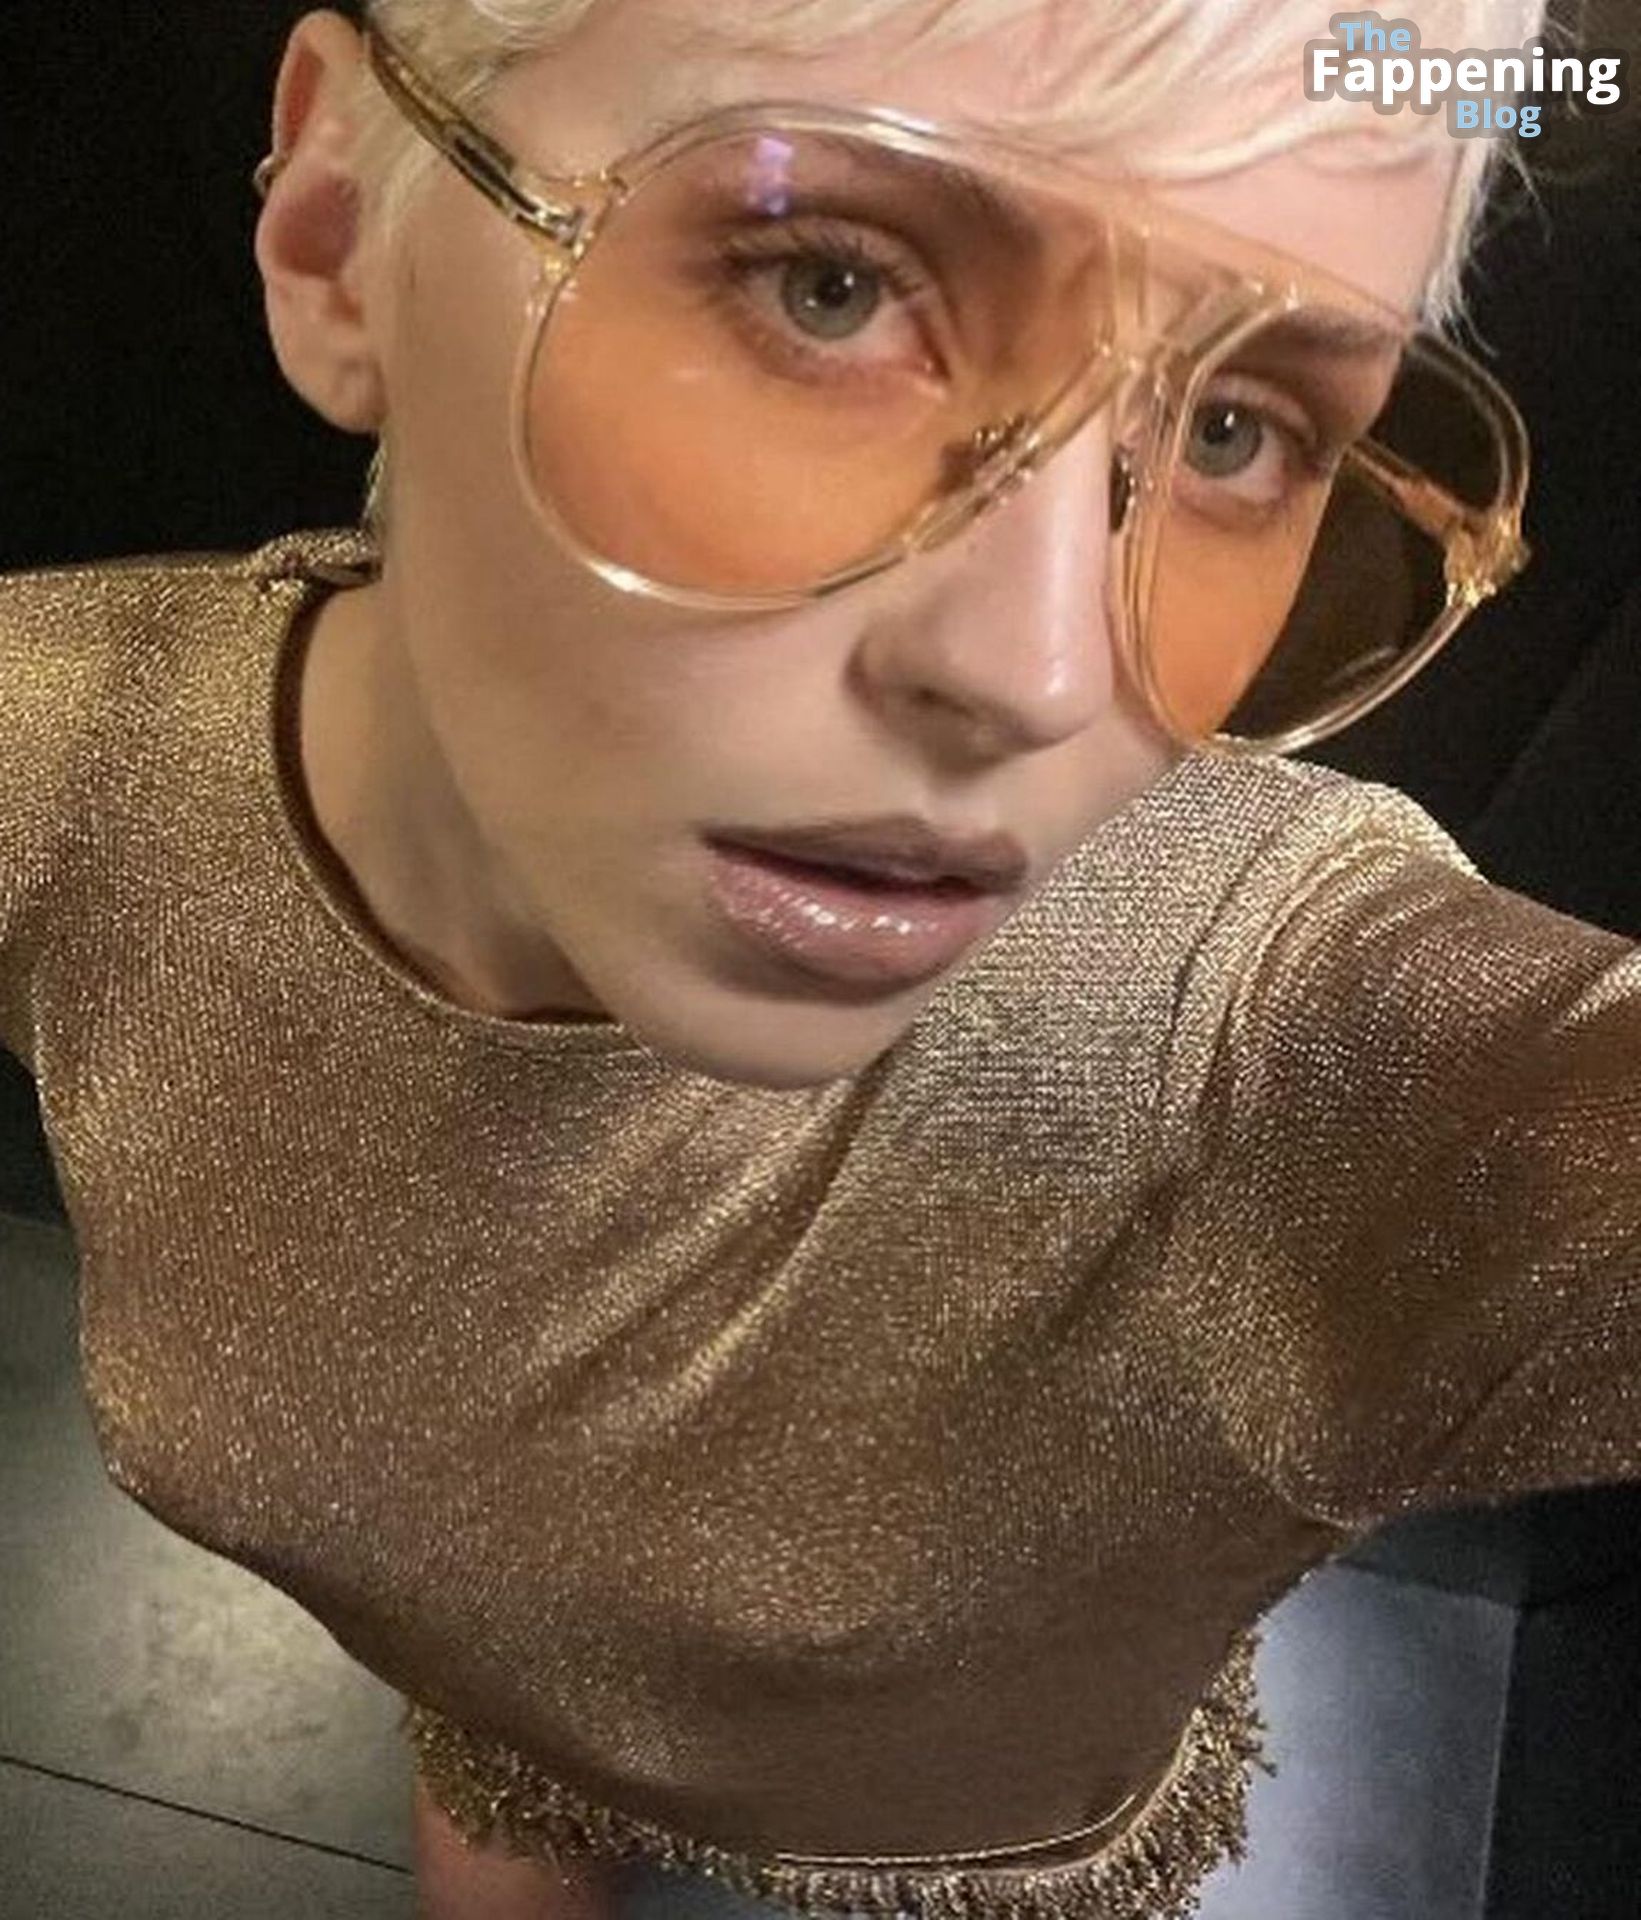 Iris Law Displays Her Nude Tits at the Tom Ford Fall/Winter 2024 Show (19 Photos)